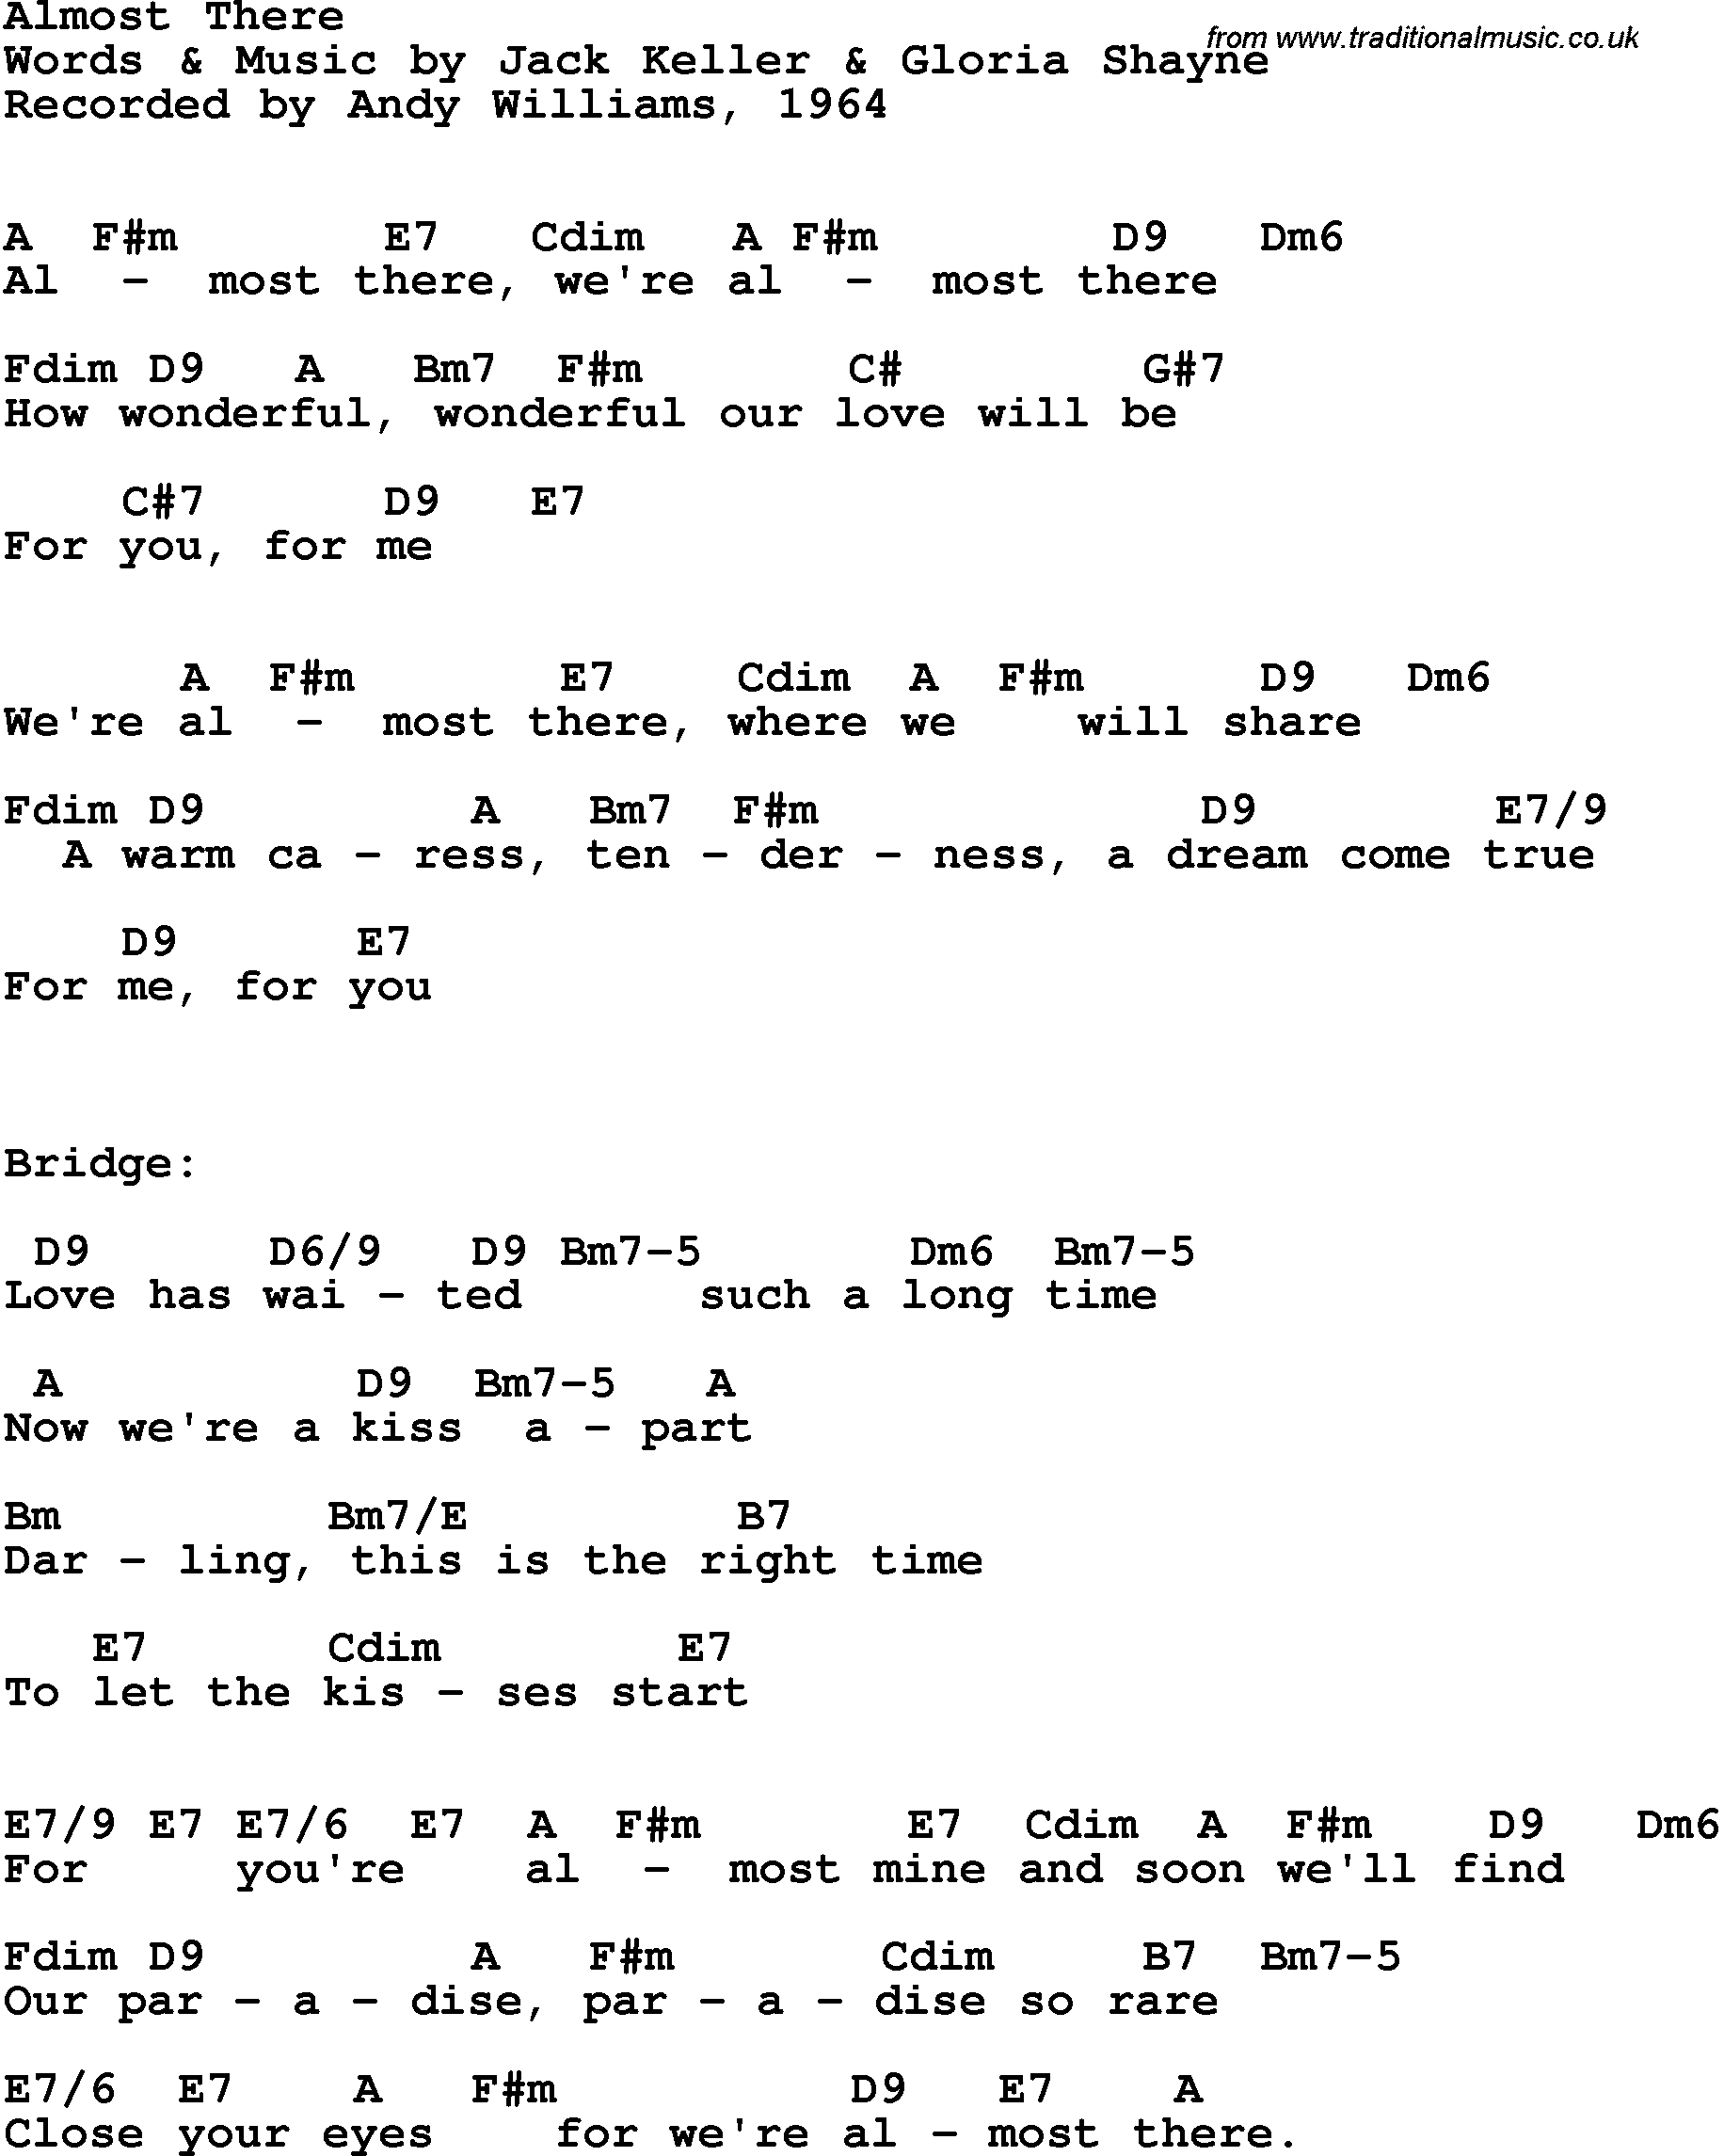 Song Lyrics with guitar chords for Almost There - Andy Williams, 1964